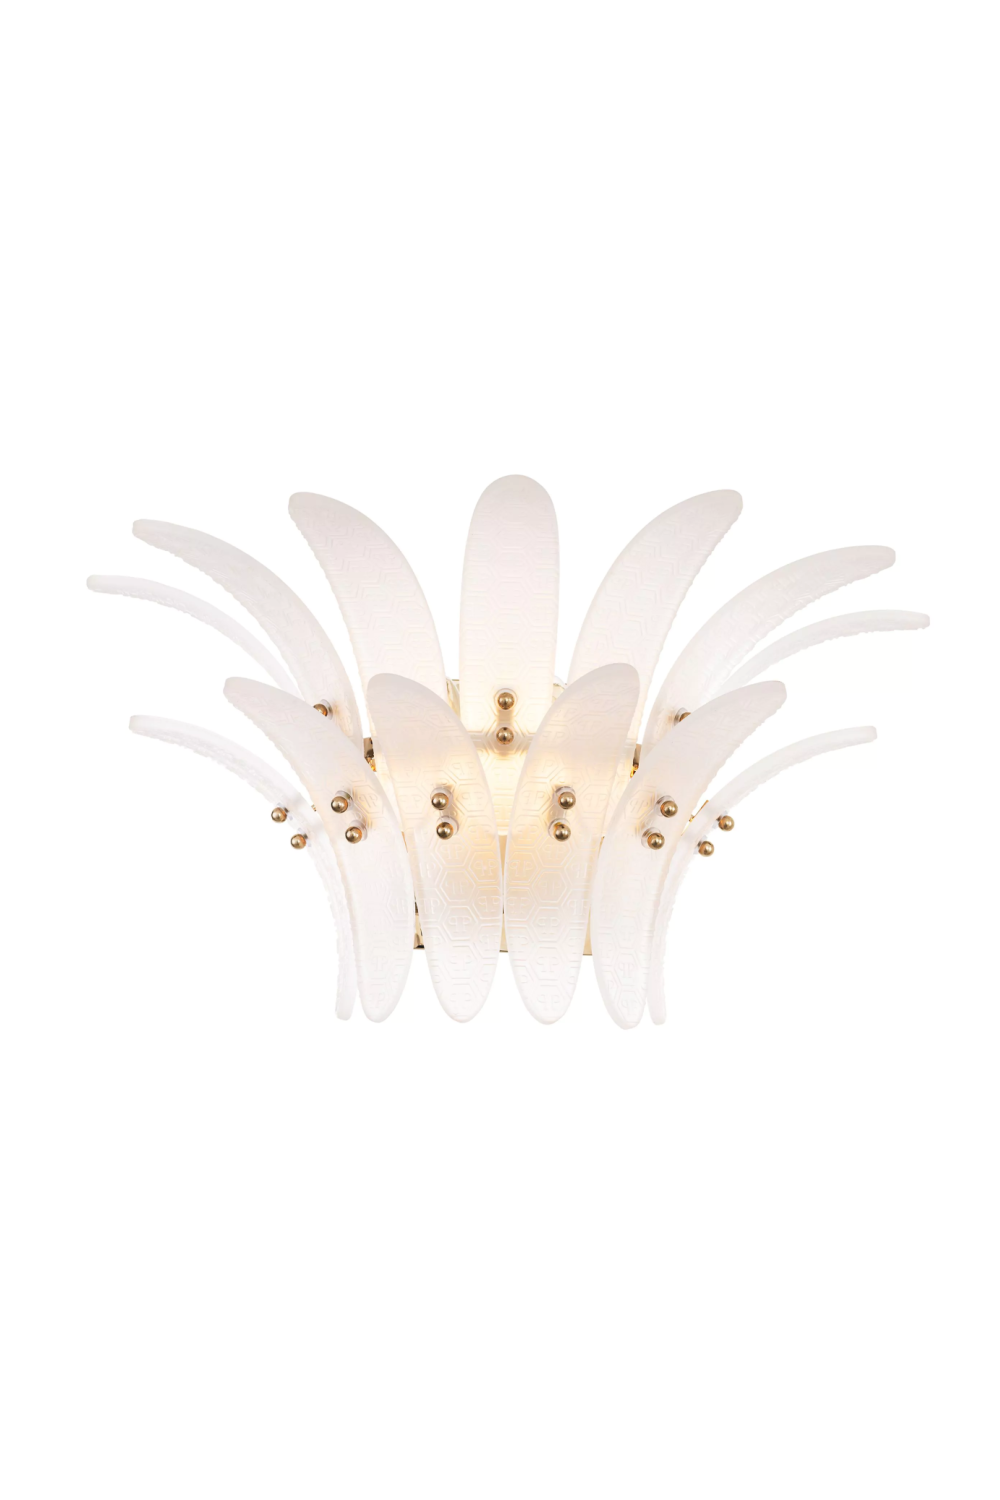 Frosted Tiered Glass Wall Lamp | Philipp Plein Bel Air | Oroa.com